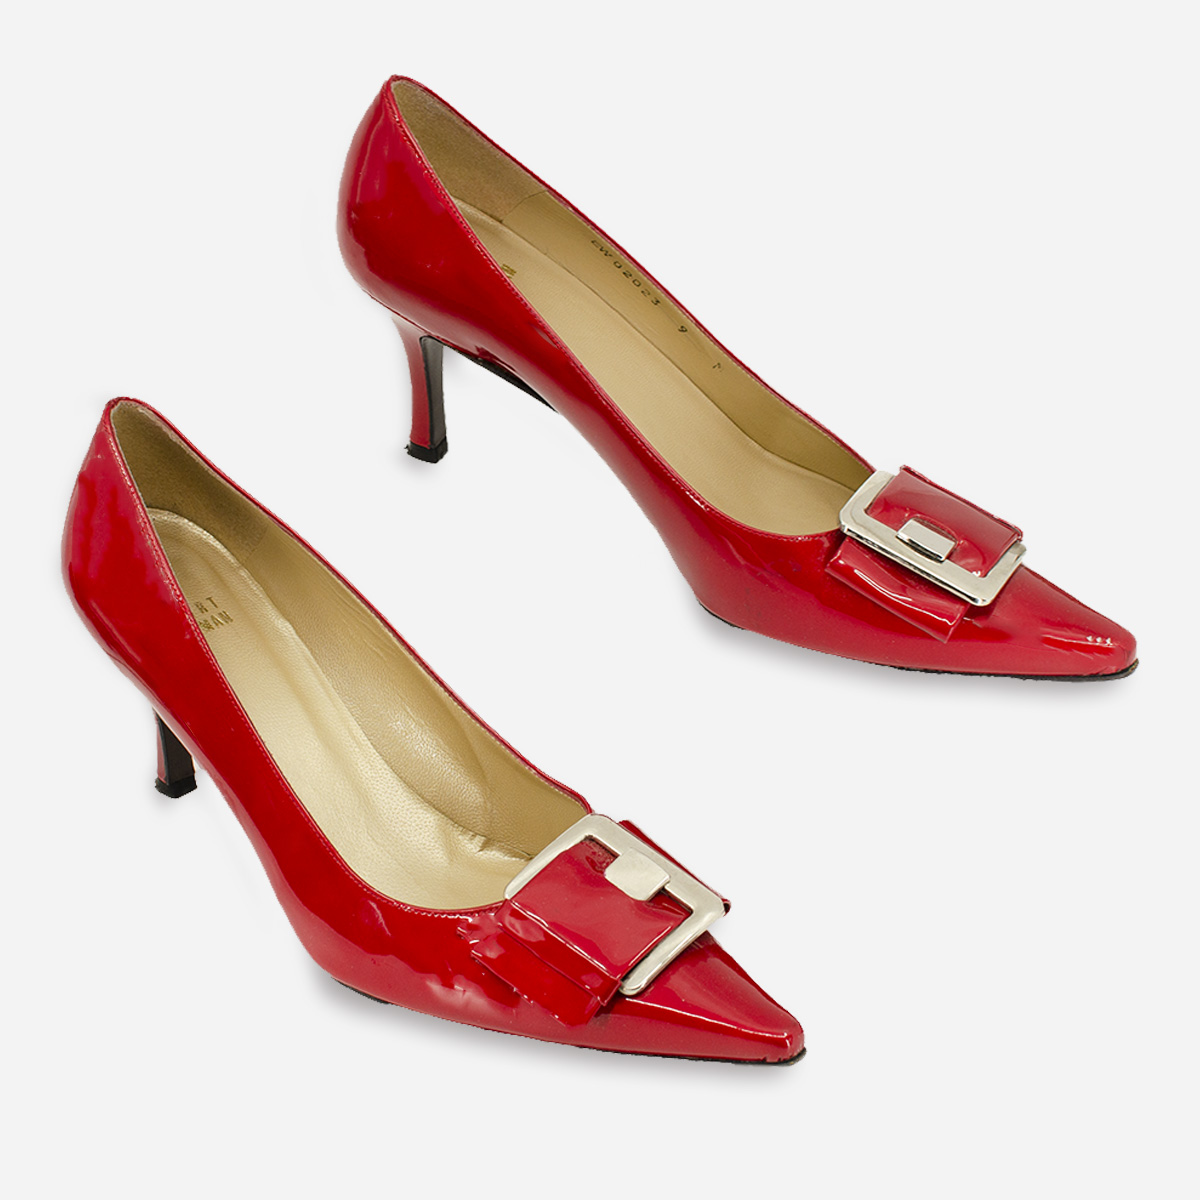 vintage buckle pumps, red patent leather by Stuart Weitzman